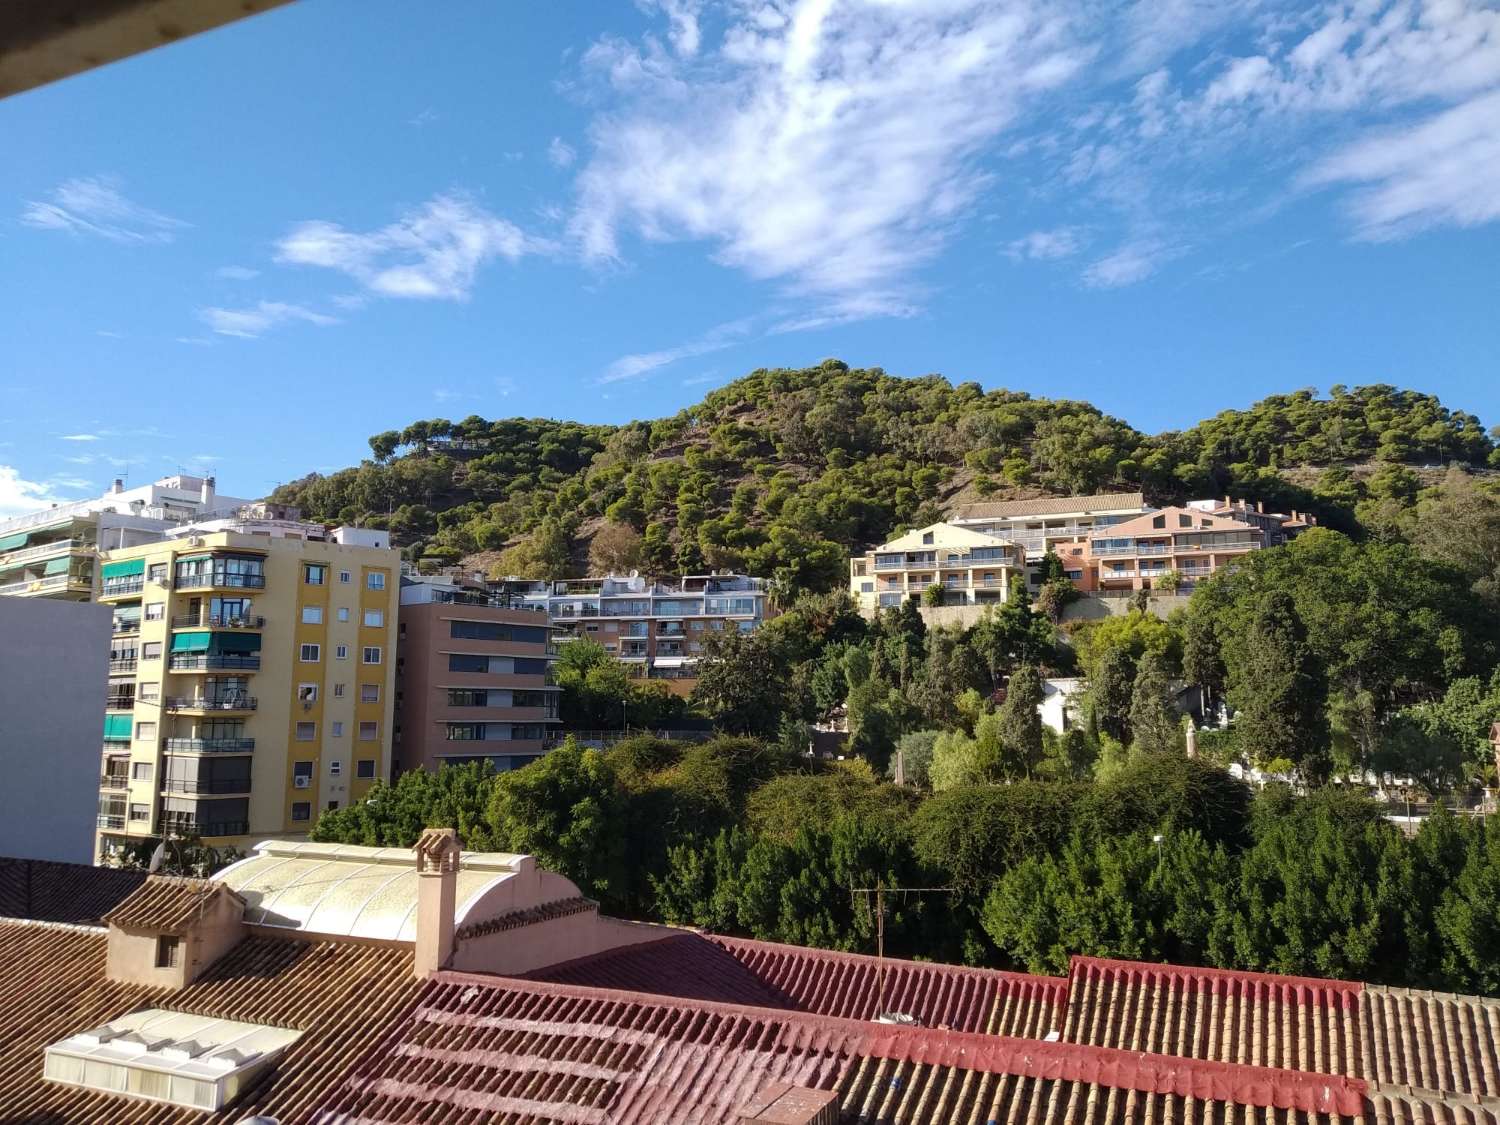 FLAT FOR SALE IN MALAGUETA WITH VIEWS TO GIBRALFARO. PARKING INCLUDED IN PRICE